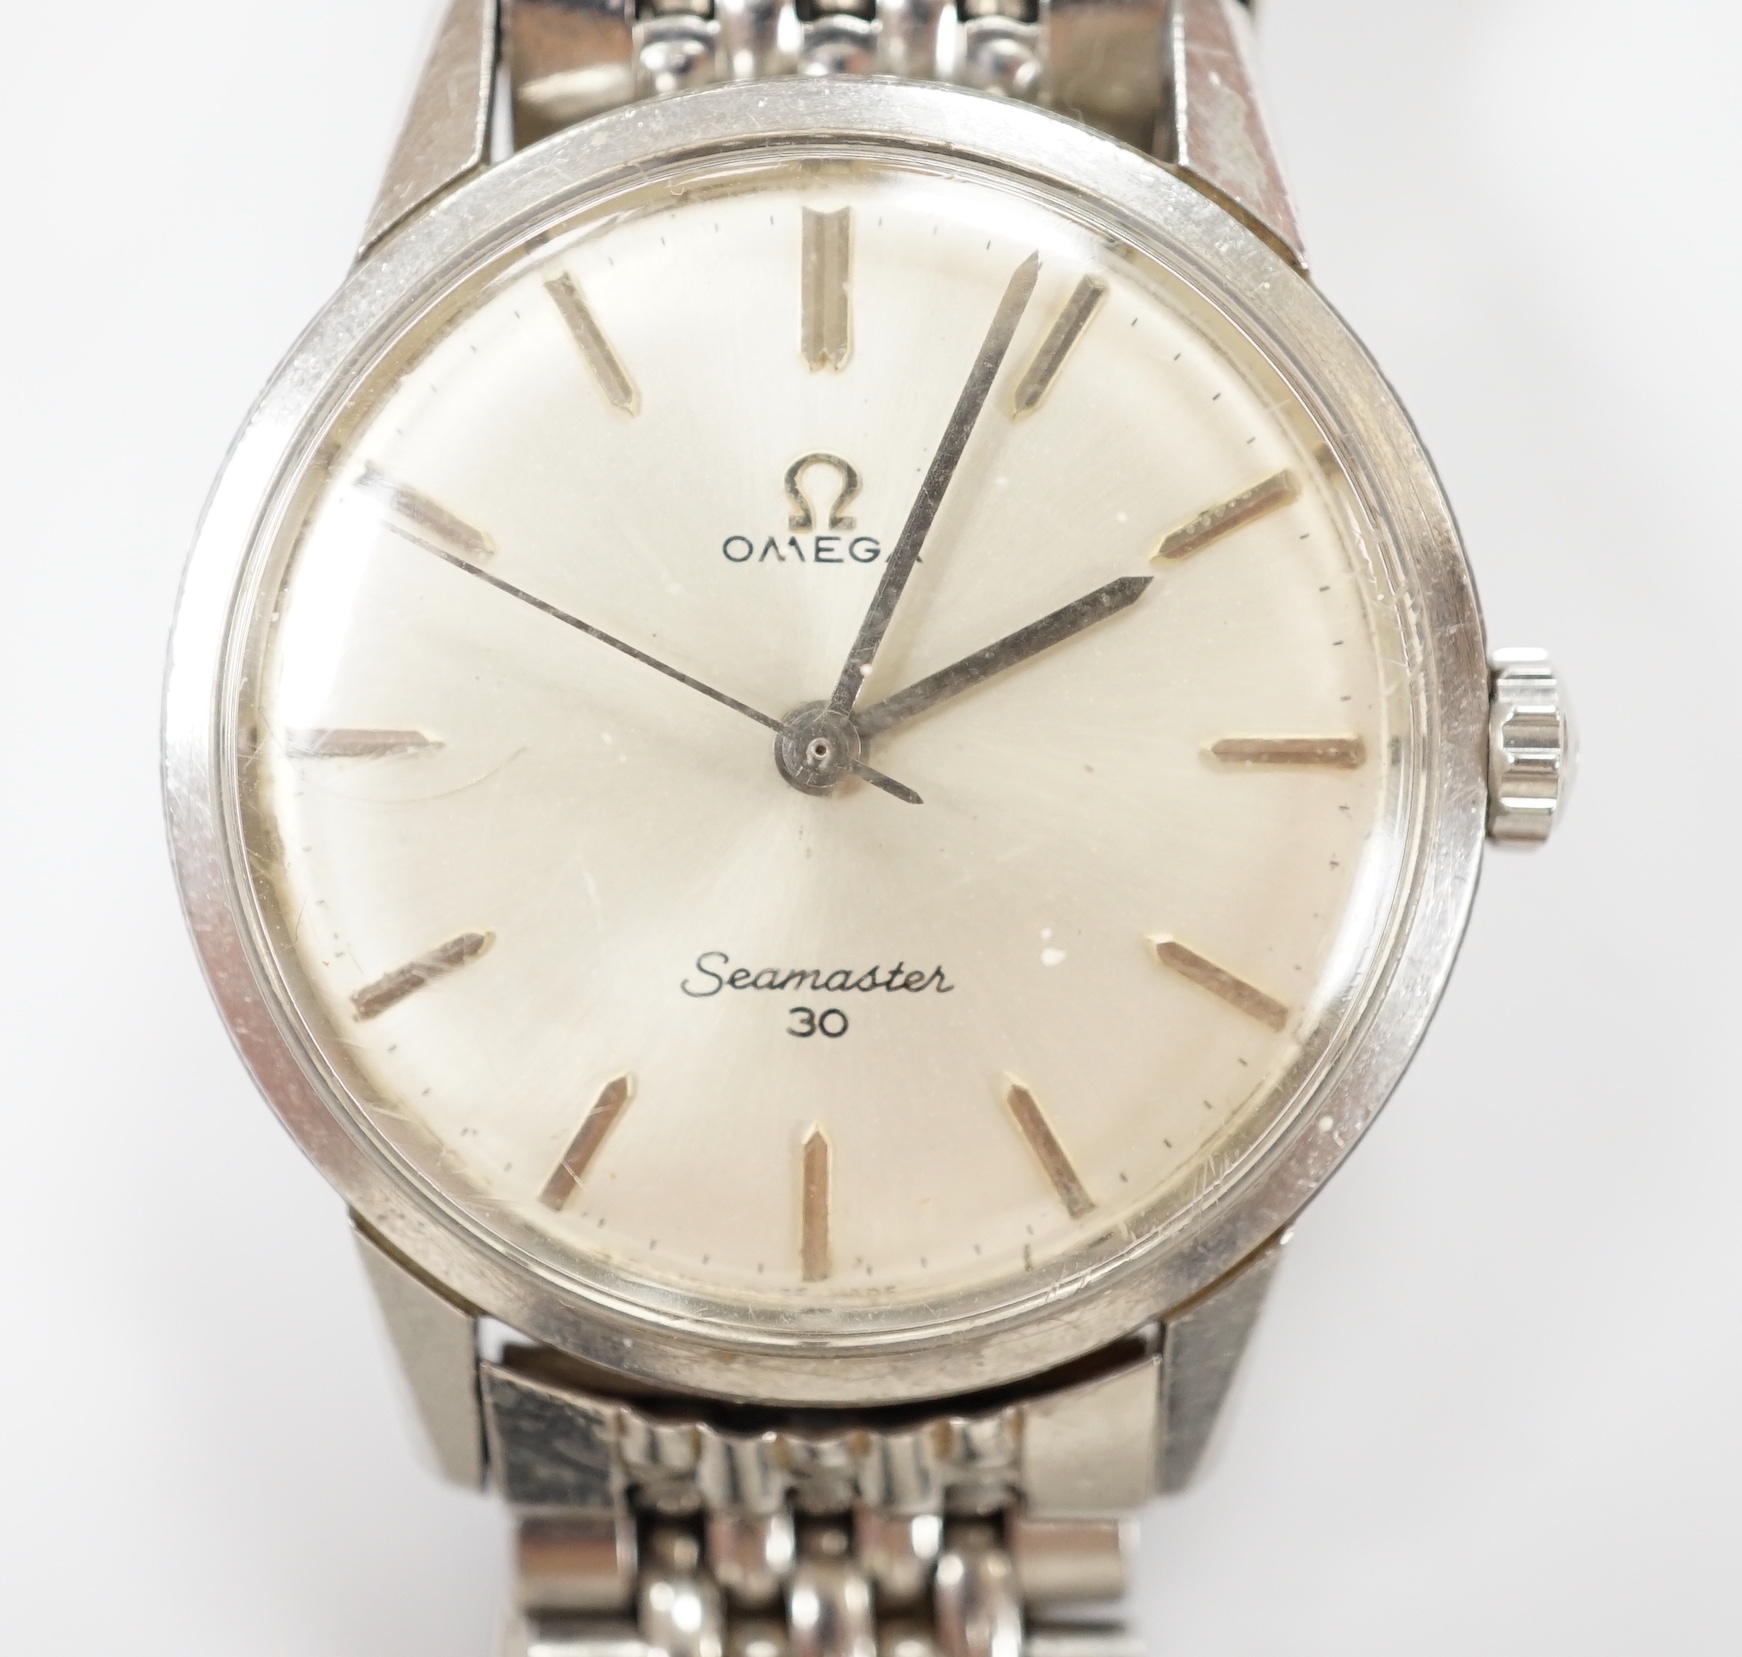 A gentleman's stainless steel Omega Seamaster 30 manual wind wrist watch, on a stainless steel Omega bracelet, case diameter 35mm, no box or papers.